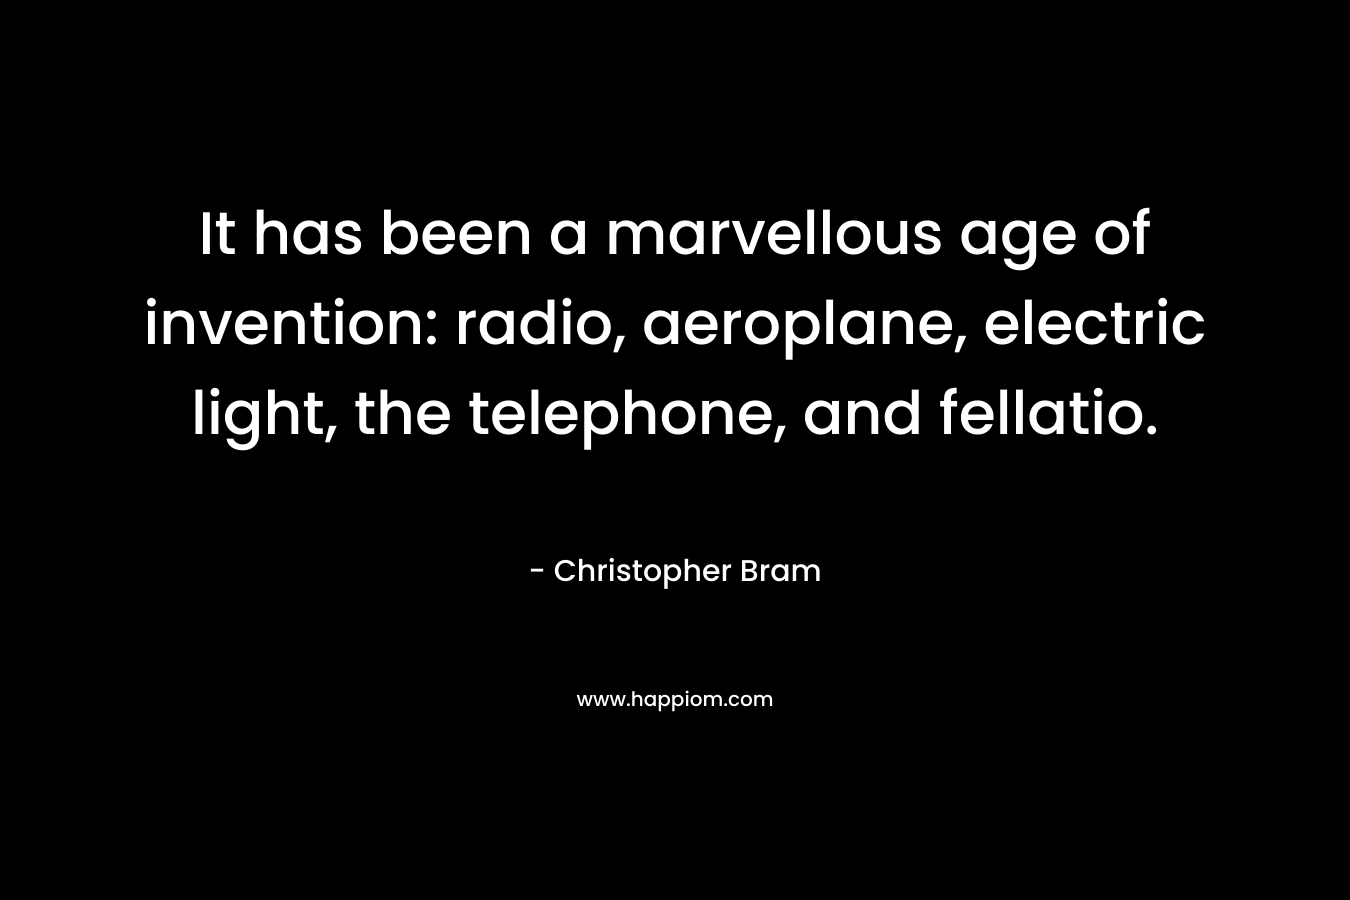 It has been a marvellous age of invention: radio, aeroplane, electric light, the telephone, and fellatio.